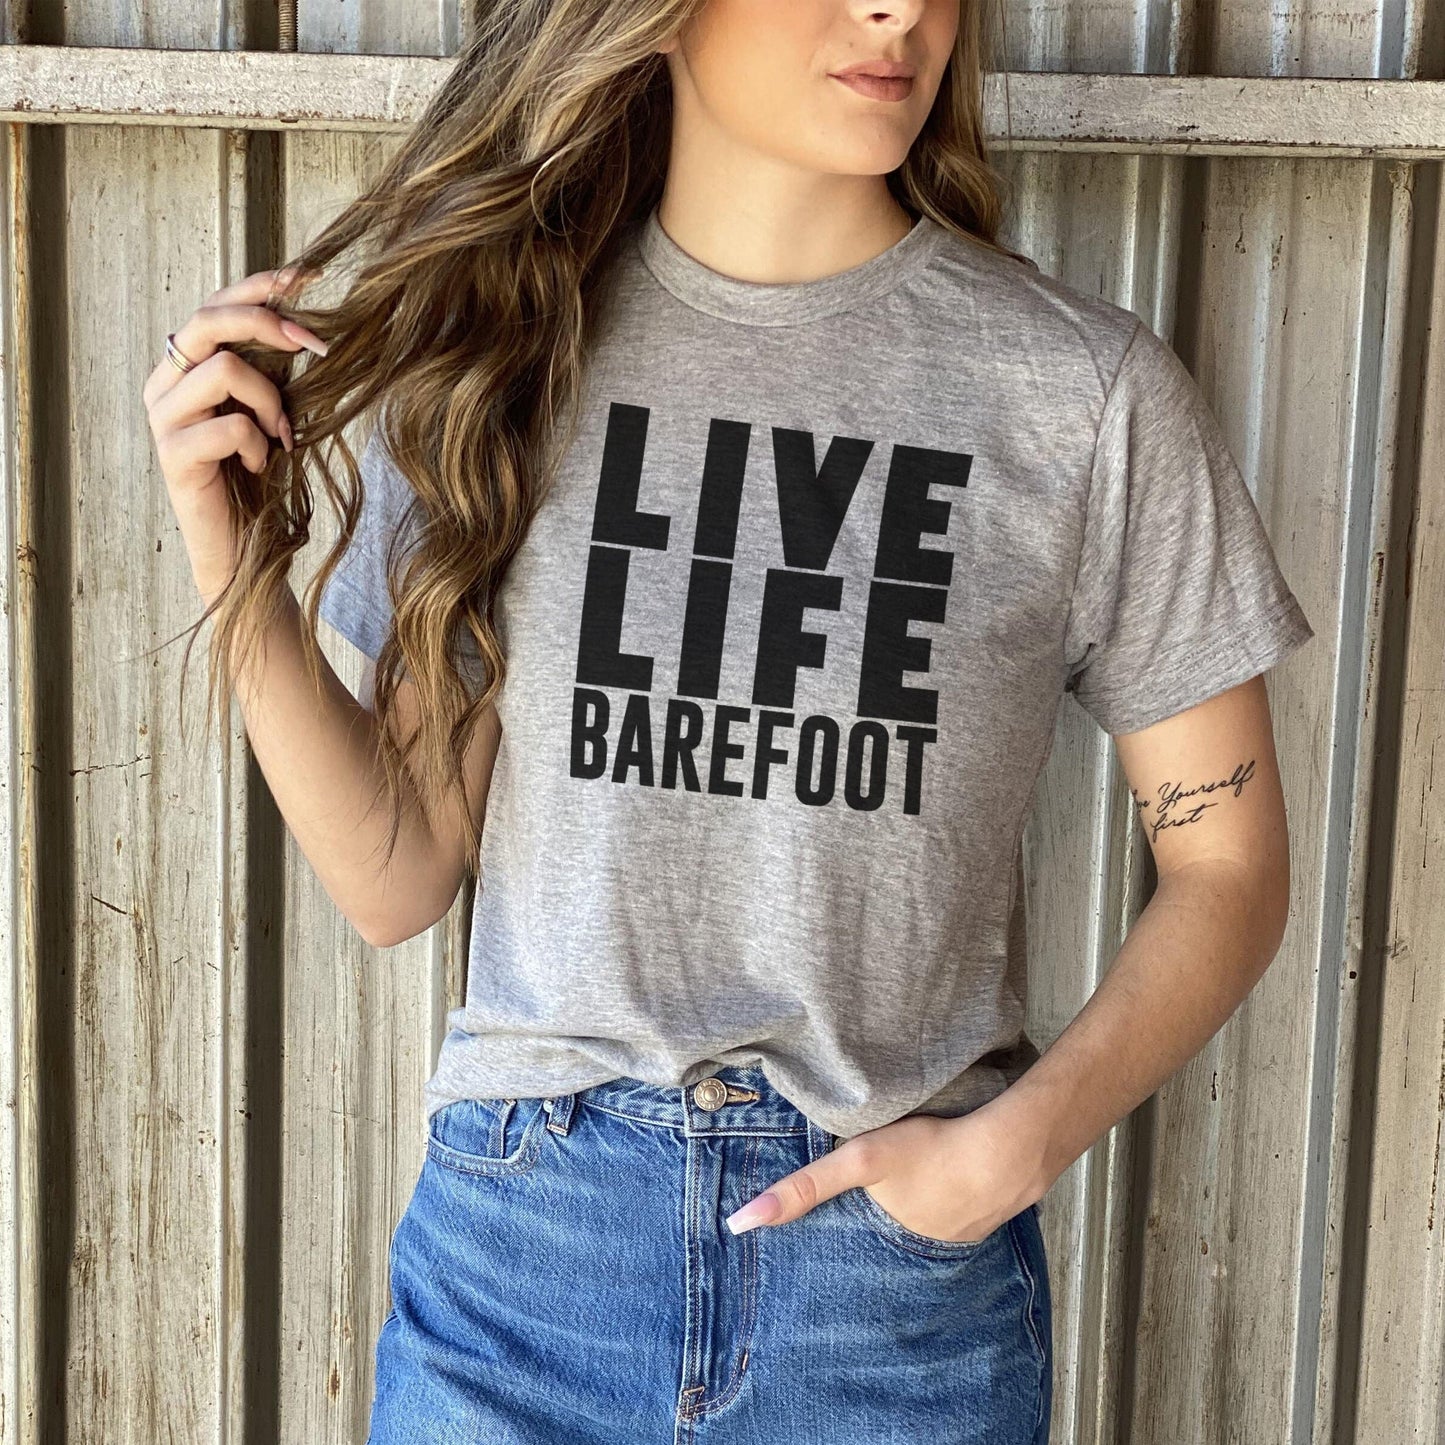 ADULT SIZE "Live Life Barefoot" Grey T-shirt